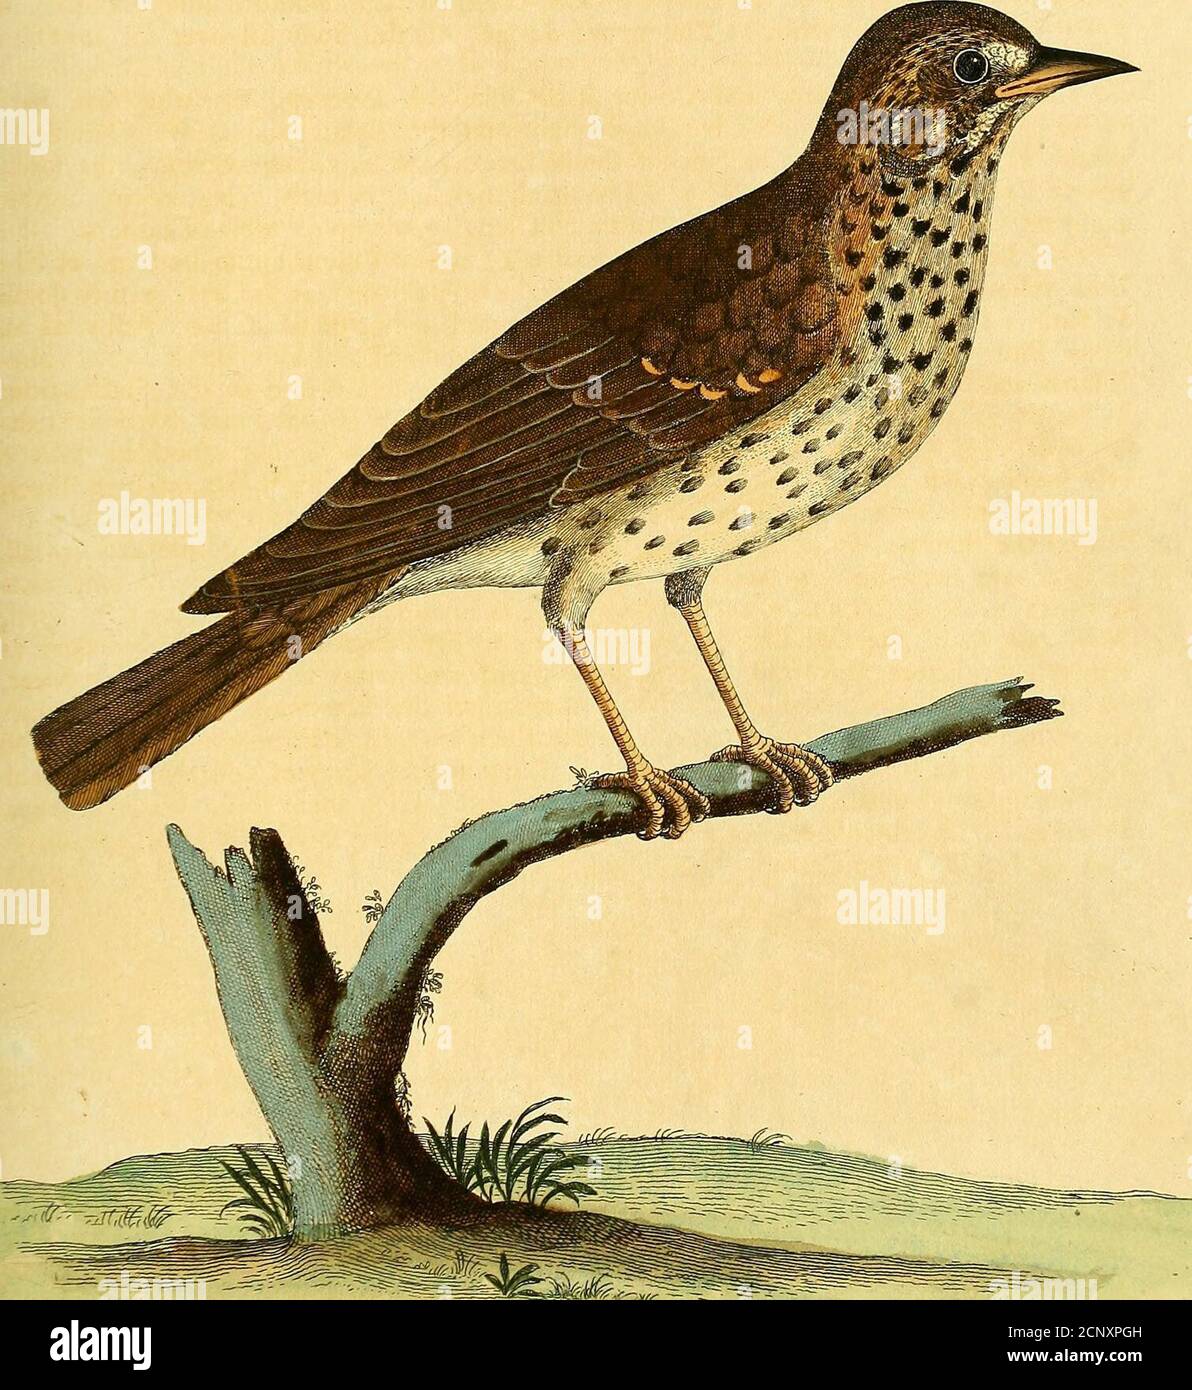 . A natural history of birds : illustrated with a hundred and one copper plates, curiously engraven from the life . ll black Spots, thin-fet. In the beginning of the Spring it fits on high Trees,^nd lings moft fweetly. It is a folitary Bird, filly, and eafily taken. For the delicate Tafte of its Flefh it is highly and defervedly commended by all.It is a rare Song-Bird, as well for the great Variety of its Notes, as its long con-tinuance in Song (which is at leaft nine Months in the Year.) They breed in AprilsMay, and June; the firft Brood always prove the beft Birds. They may be taken atfourte Stock Photo